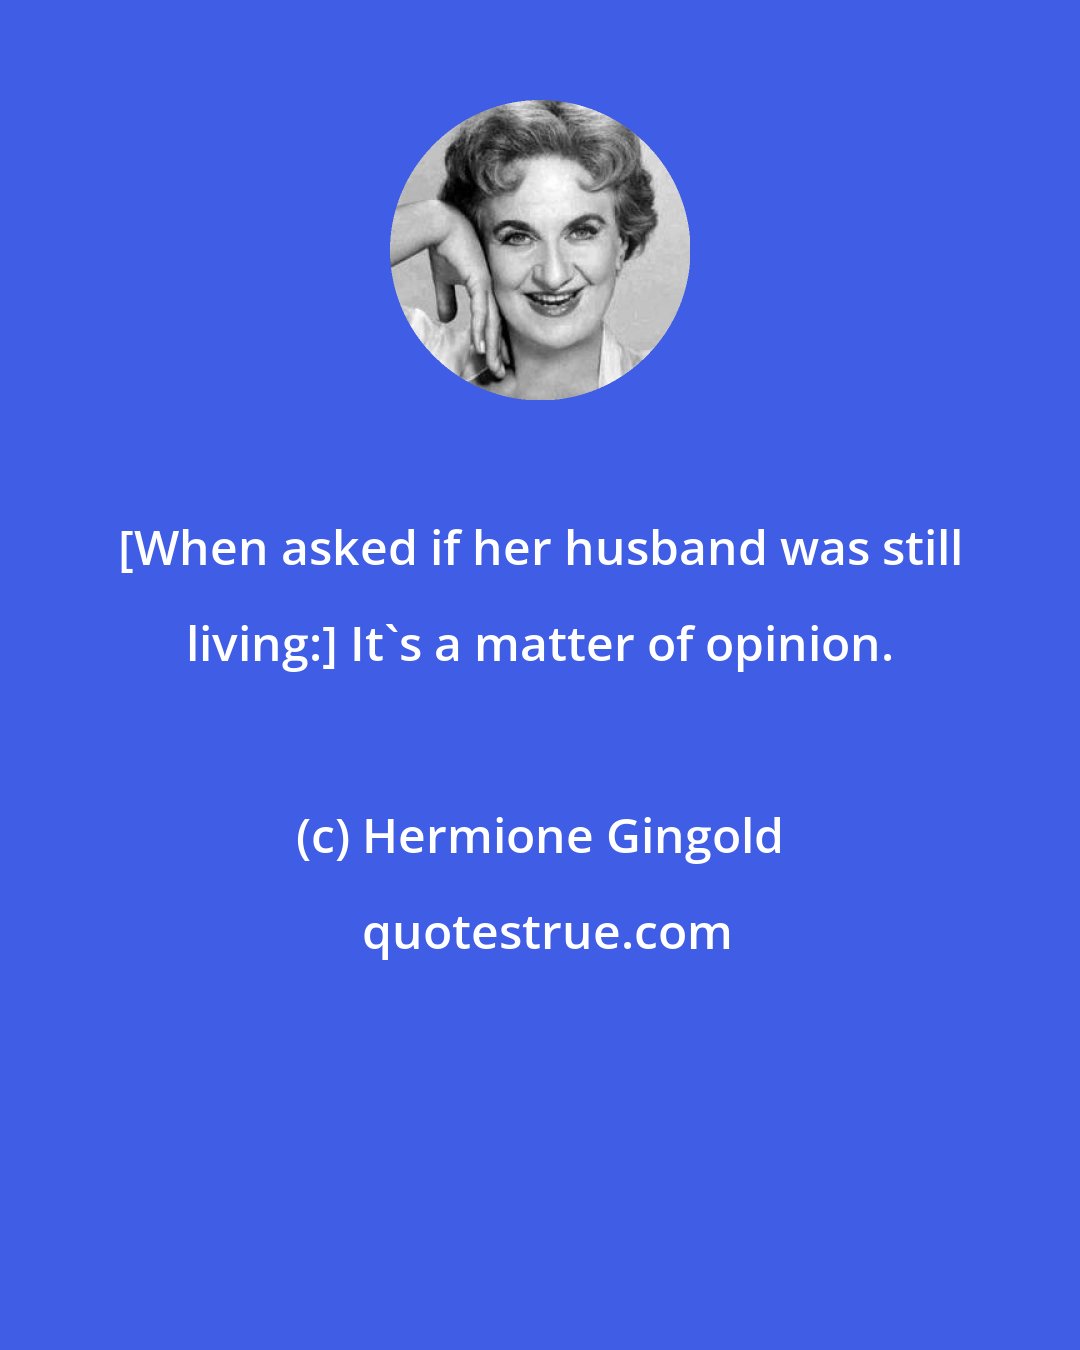 Hermione Gingold: [When asked if her husband was still living:] It's a matter of opinion.